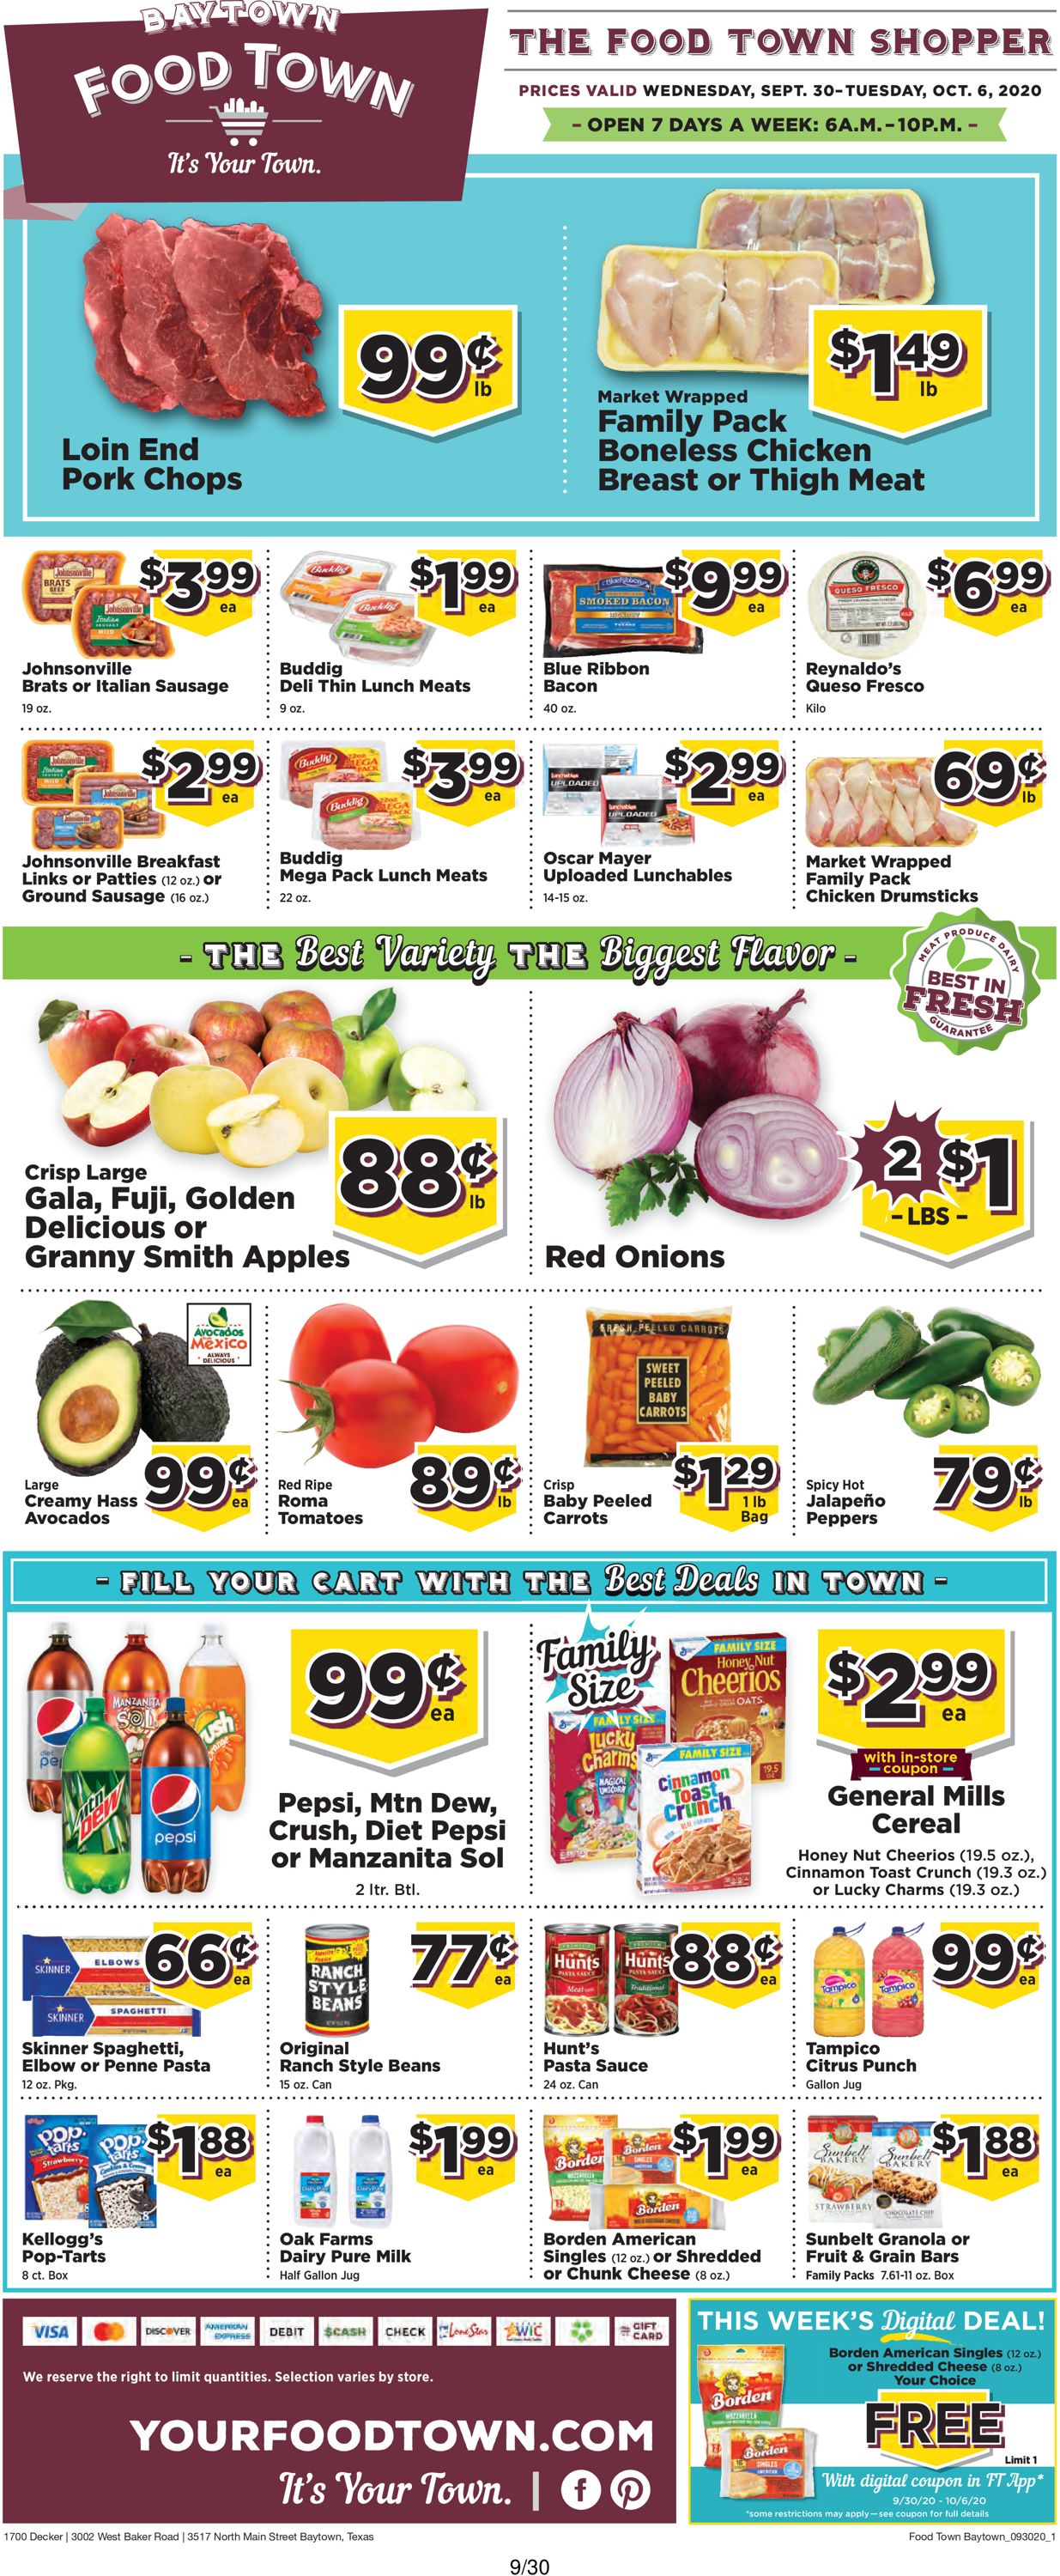 Food Town Current weekly ad 09/30 - 10/06/2020 - frequent-ads.com